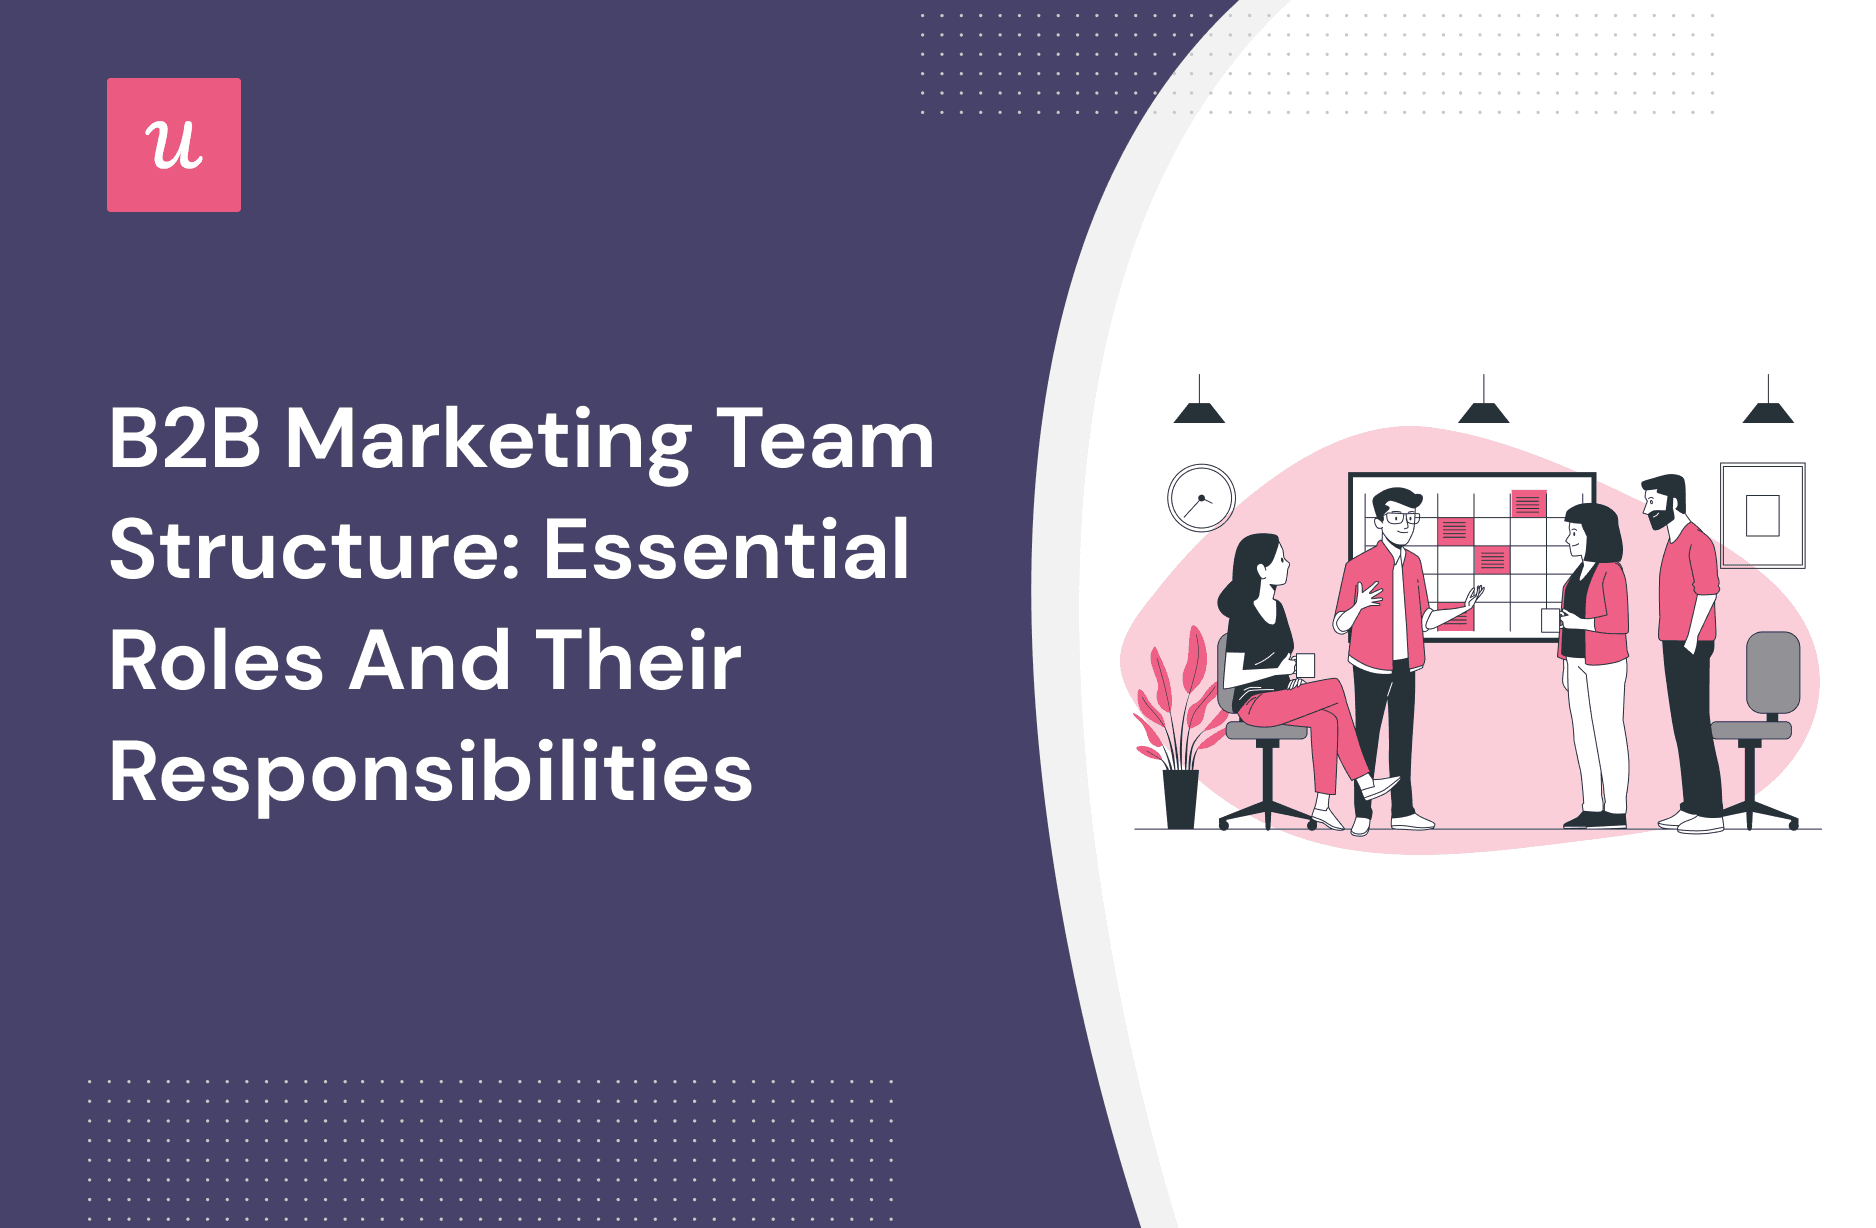 B2B Marketing Team Structure: Essential Roles and Their Responsibilities cover